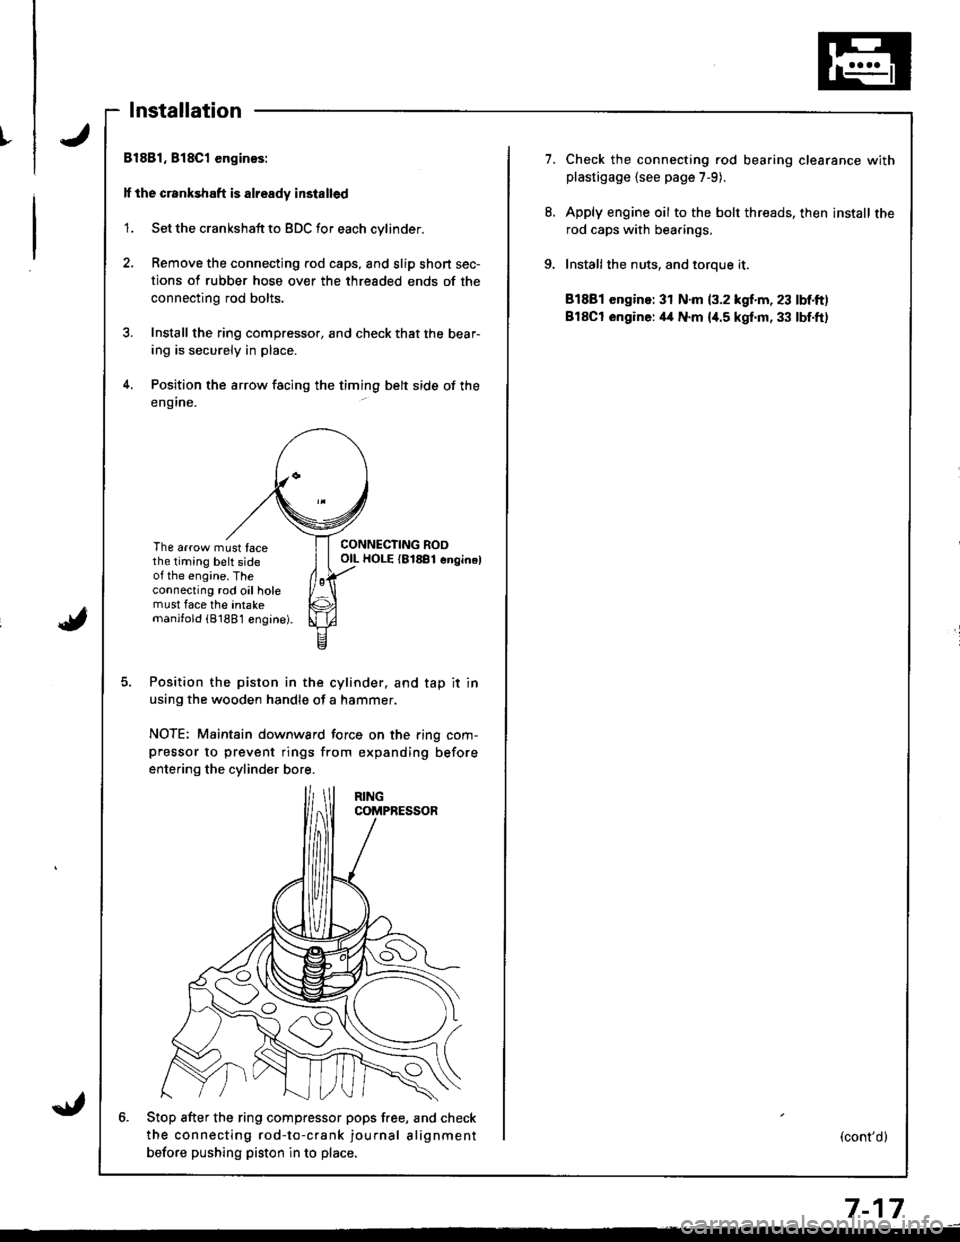 HONDA INTEGRA 1998 4.G Workshop Manual t
Installation
Bl881, 818C1 enginos:
lf the crankshaft is already installed
1. Set the crankshaft to BDC for each cylinder.
2, Remove the connecting rod caps, and slip short sec-
tions of rubber hose